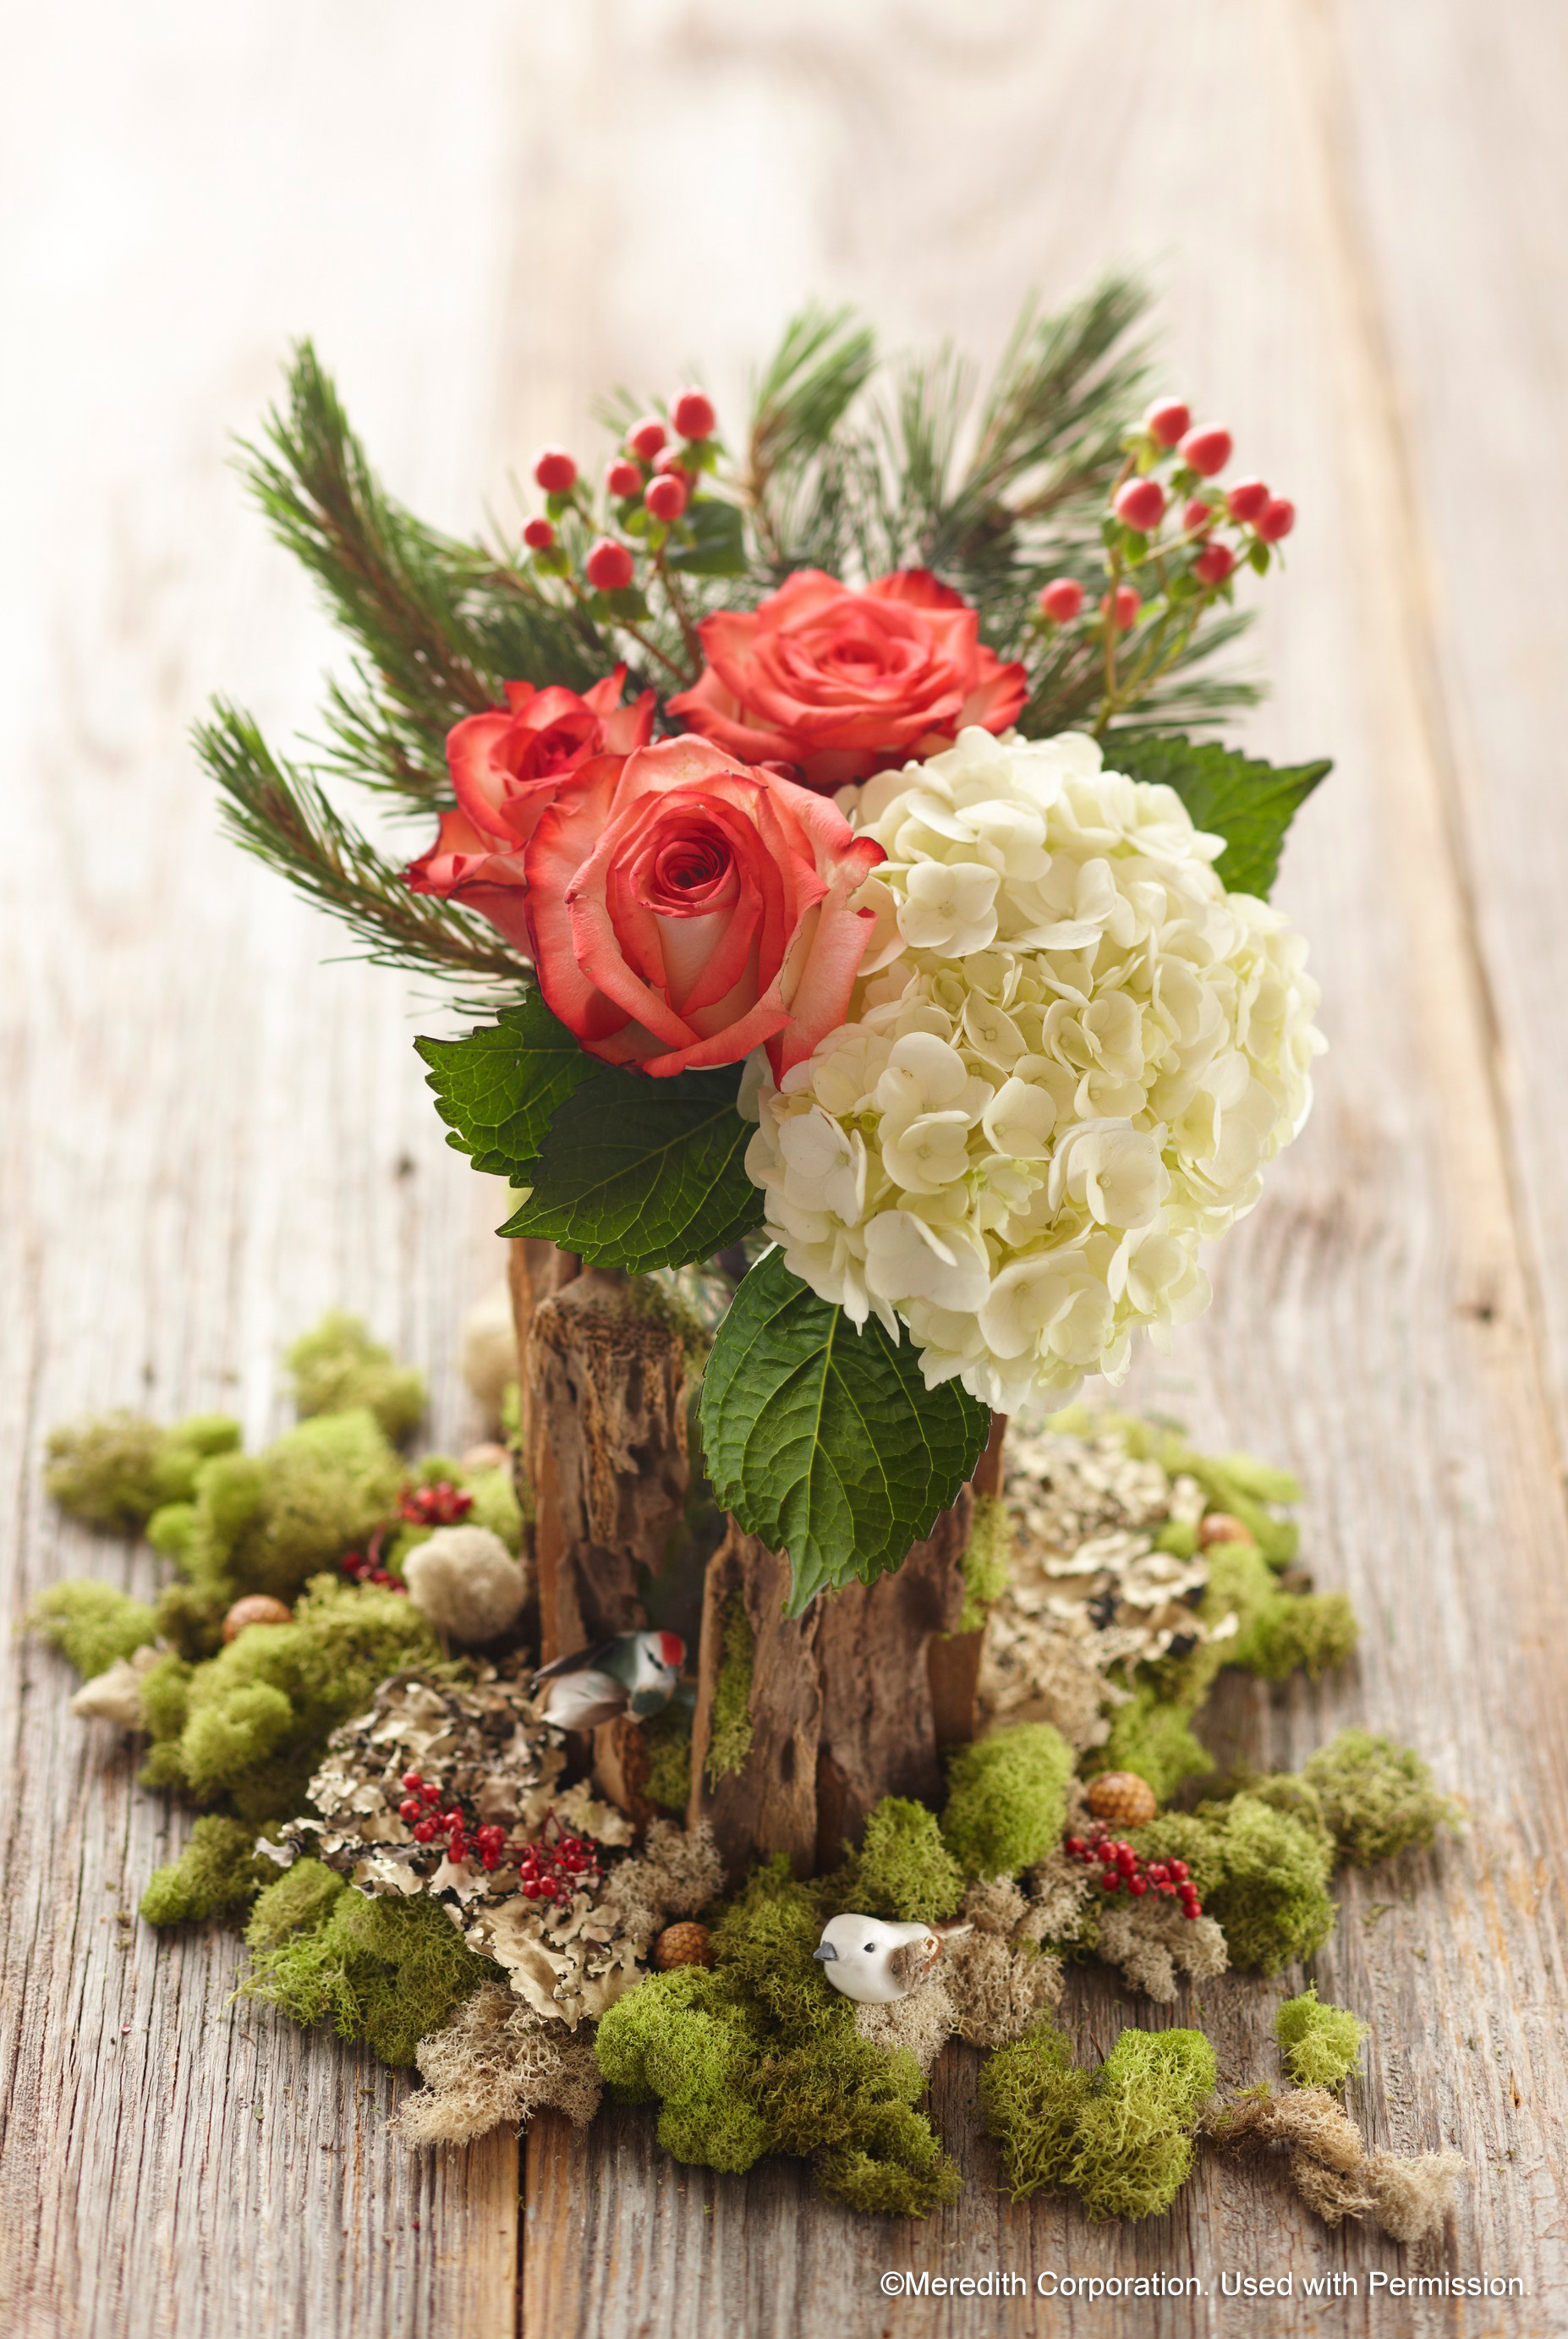 Christmas Flower Decorations
 Ten Unique Ways to Incorporate Floral Into Your Holiday